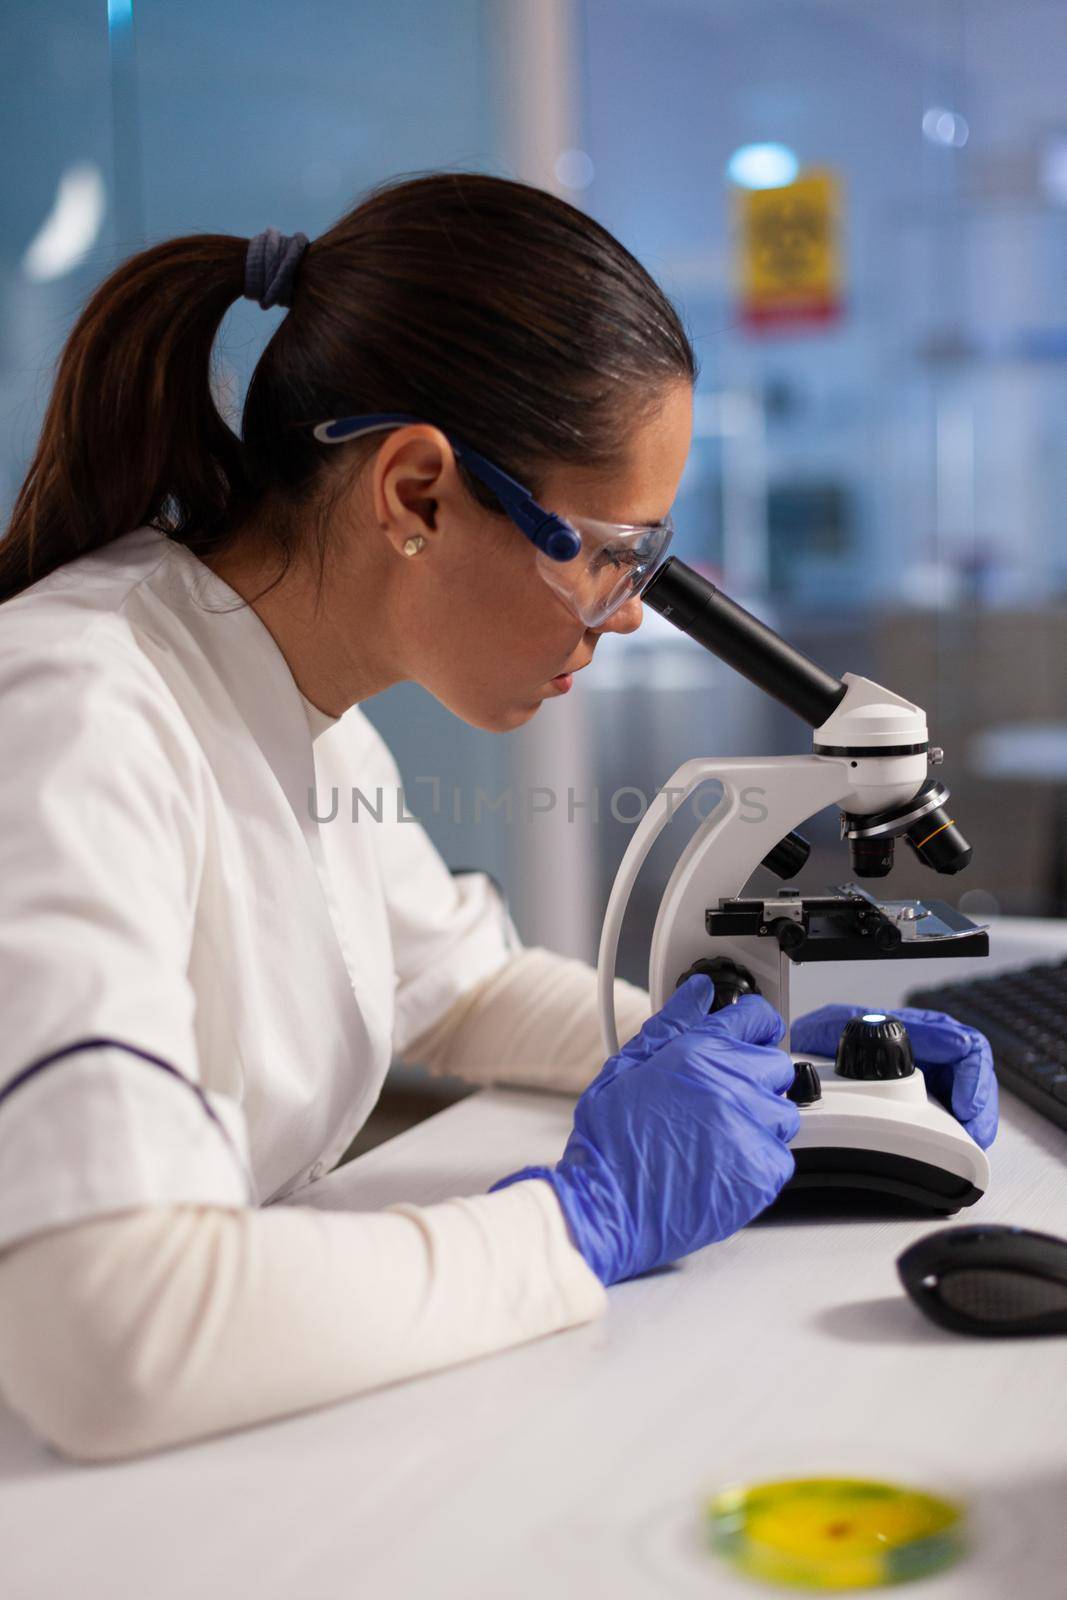 Biochemist working on microscope for cell illustration on computer screen in chemical laboratory. Scientist woman analyzing virus dna, cell tissue, diagram of plasma and hemoglobin nucleus